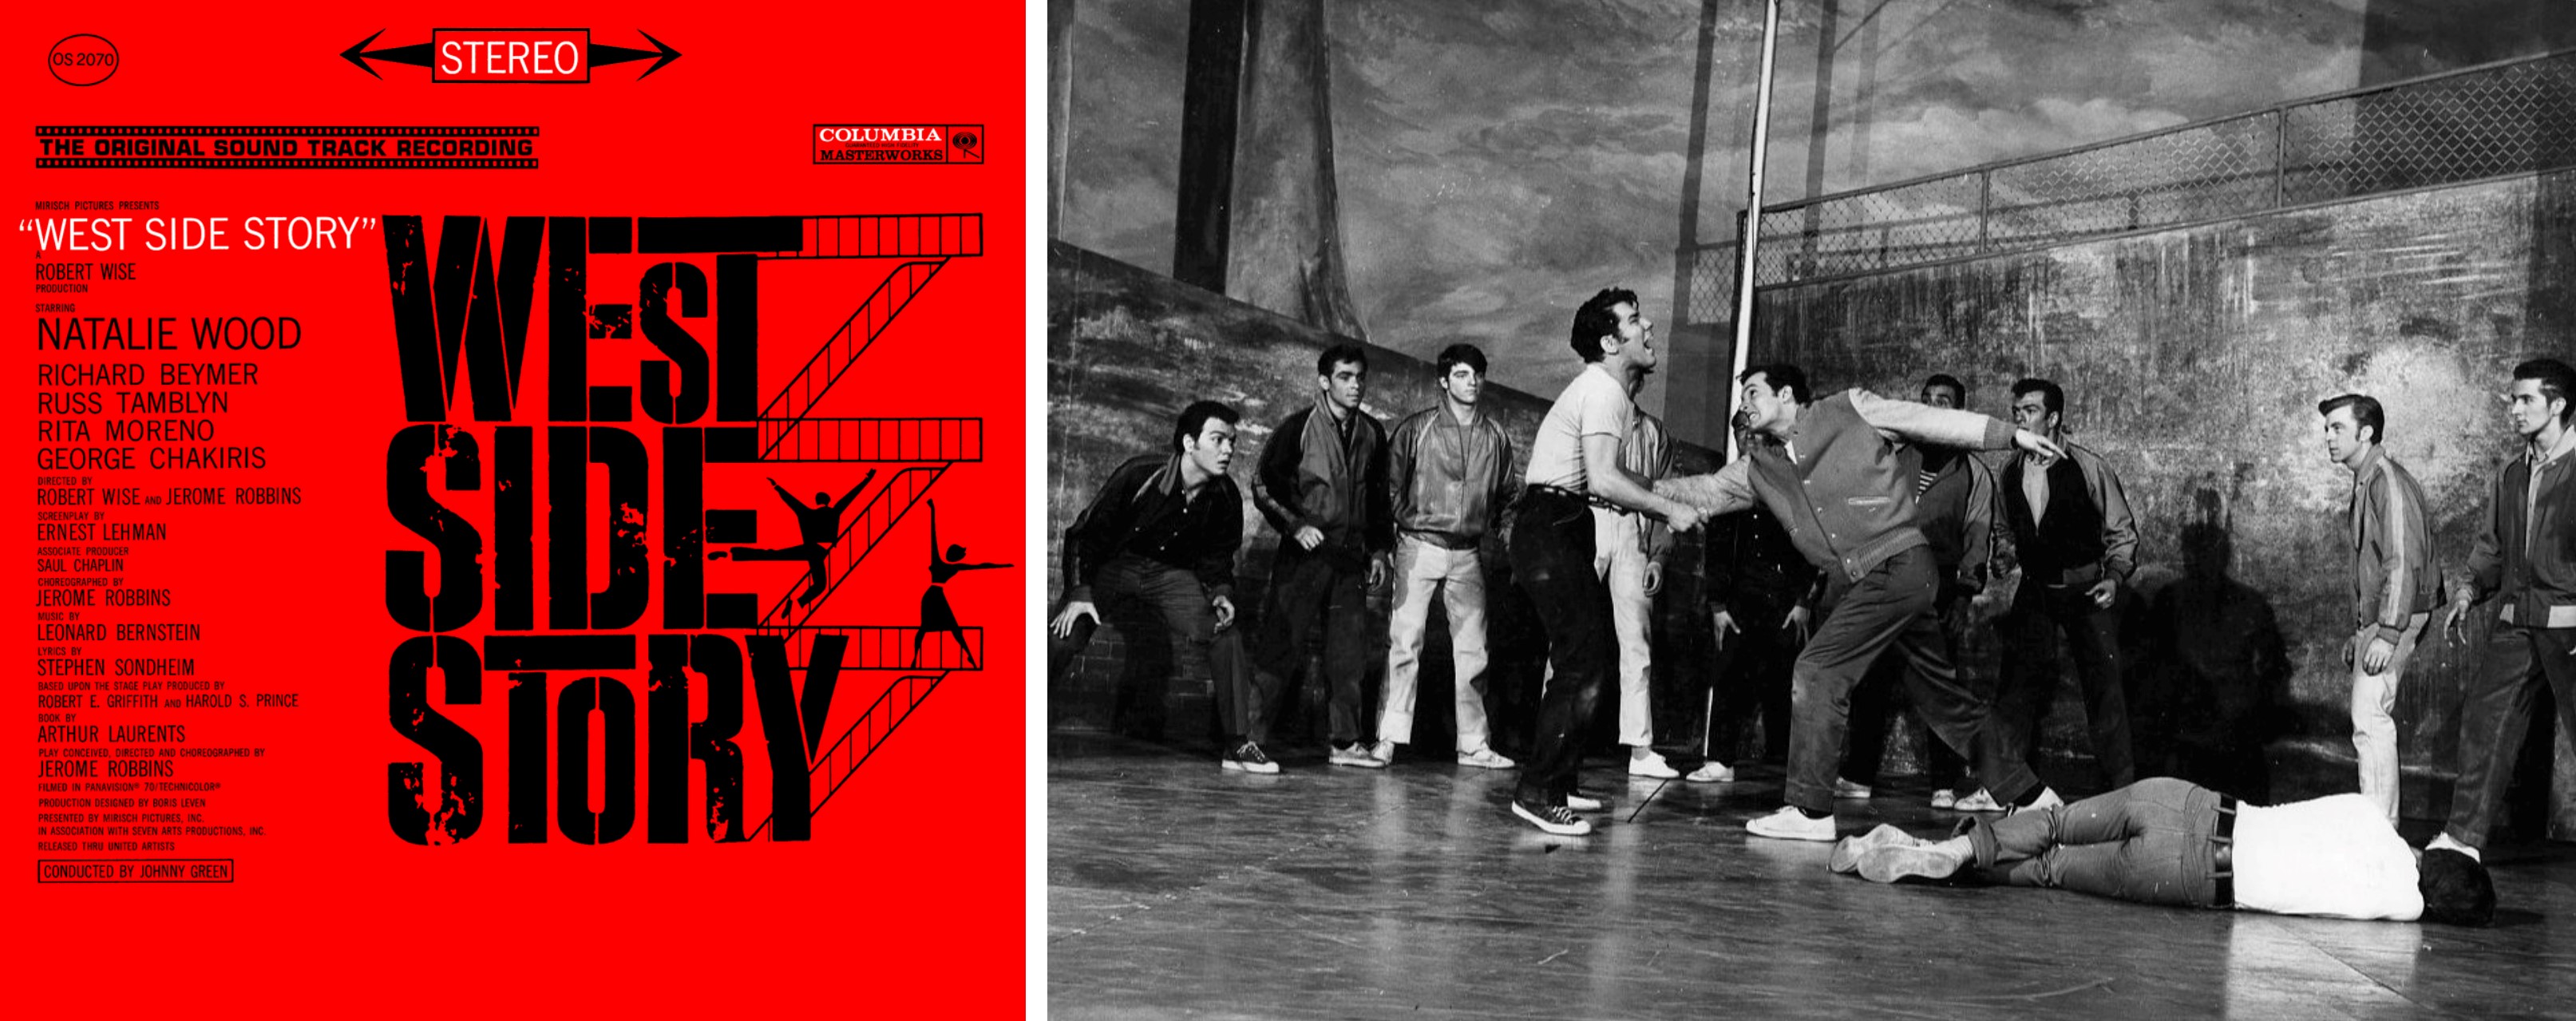 On the left, the cover of the soundtrack album from West Side Story. On the right, a scene from 'the rumble' segment of the Broadway play.